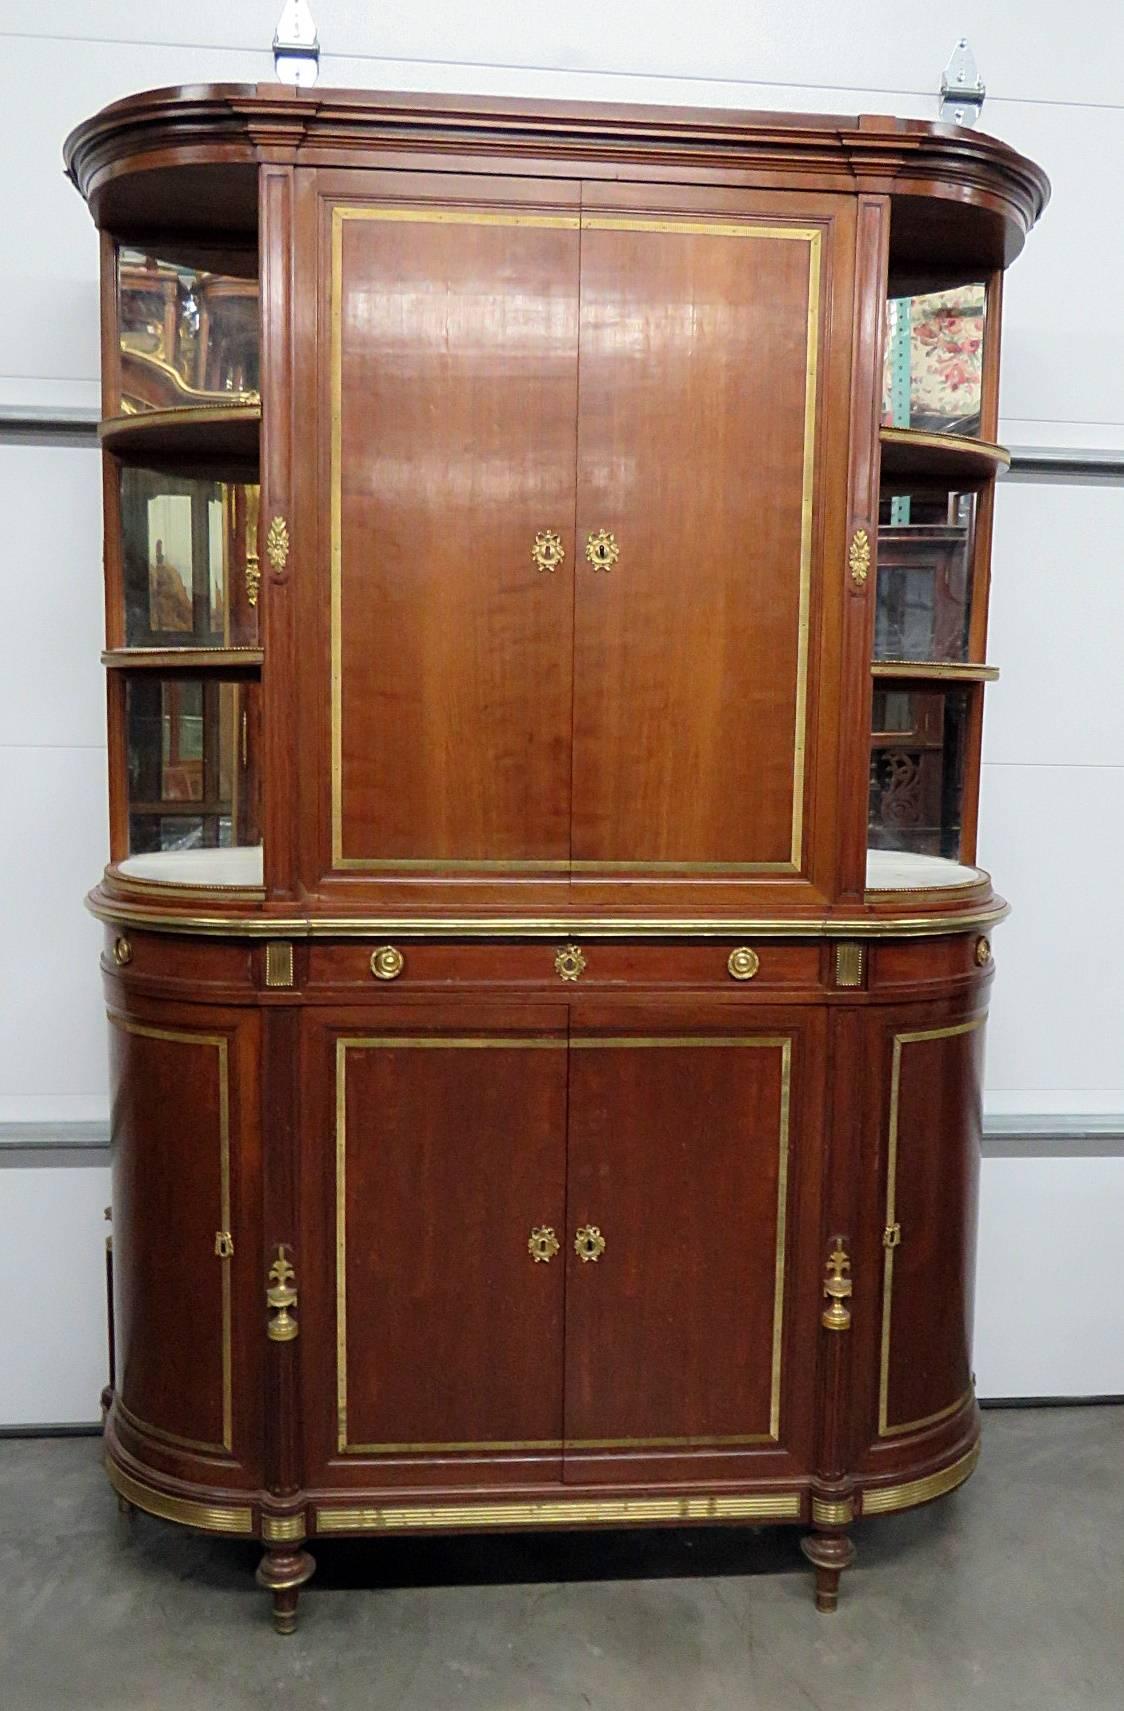 19th century signed Francois Linke Directoire style China cabinet with bronze mounts. The top has two doors containing two shelves and three open shelves on each side. The bottom has three drawers over four doors. We have recently discovered that